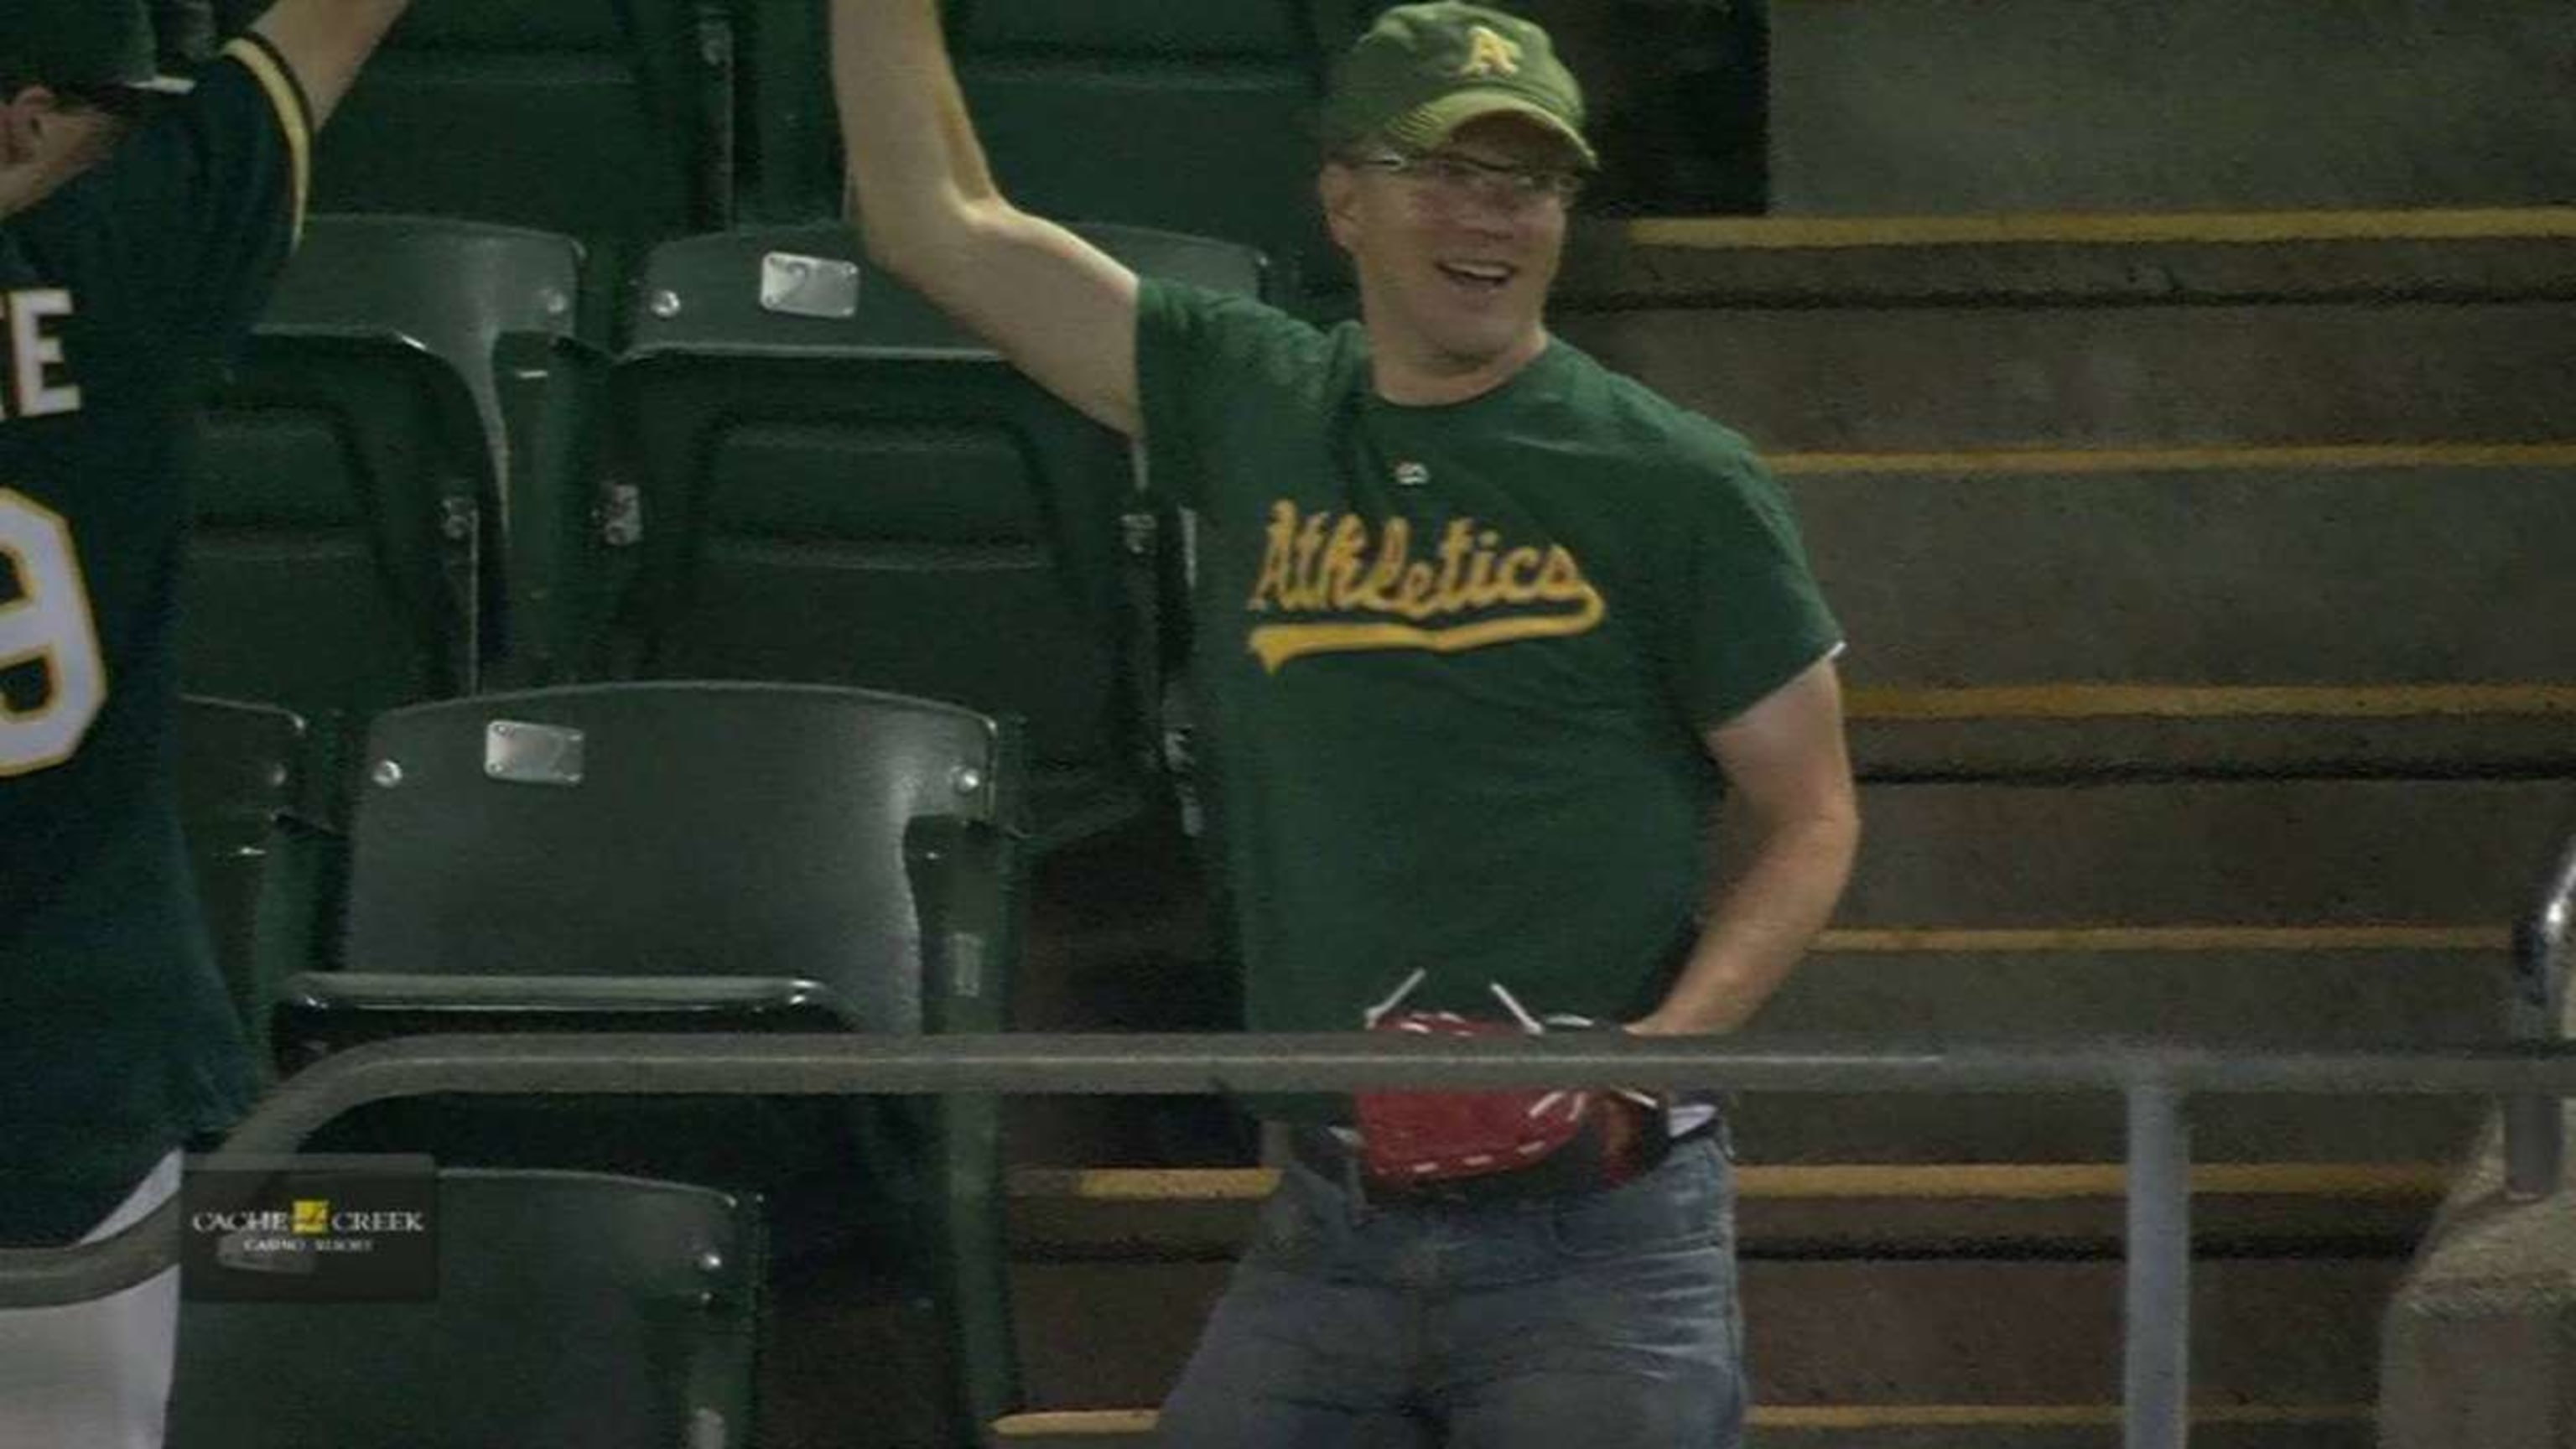 An A's fan dad used his kid's glove to make a leaping grab on a